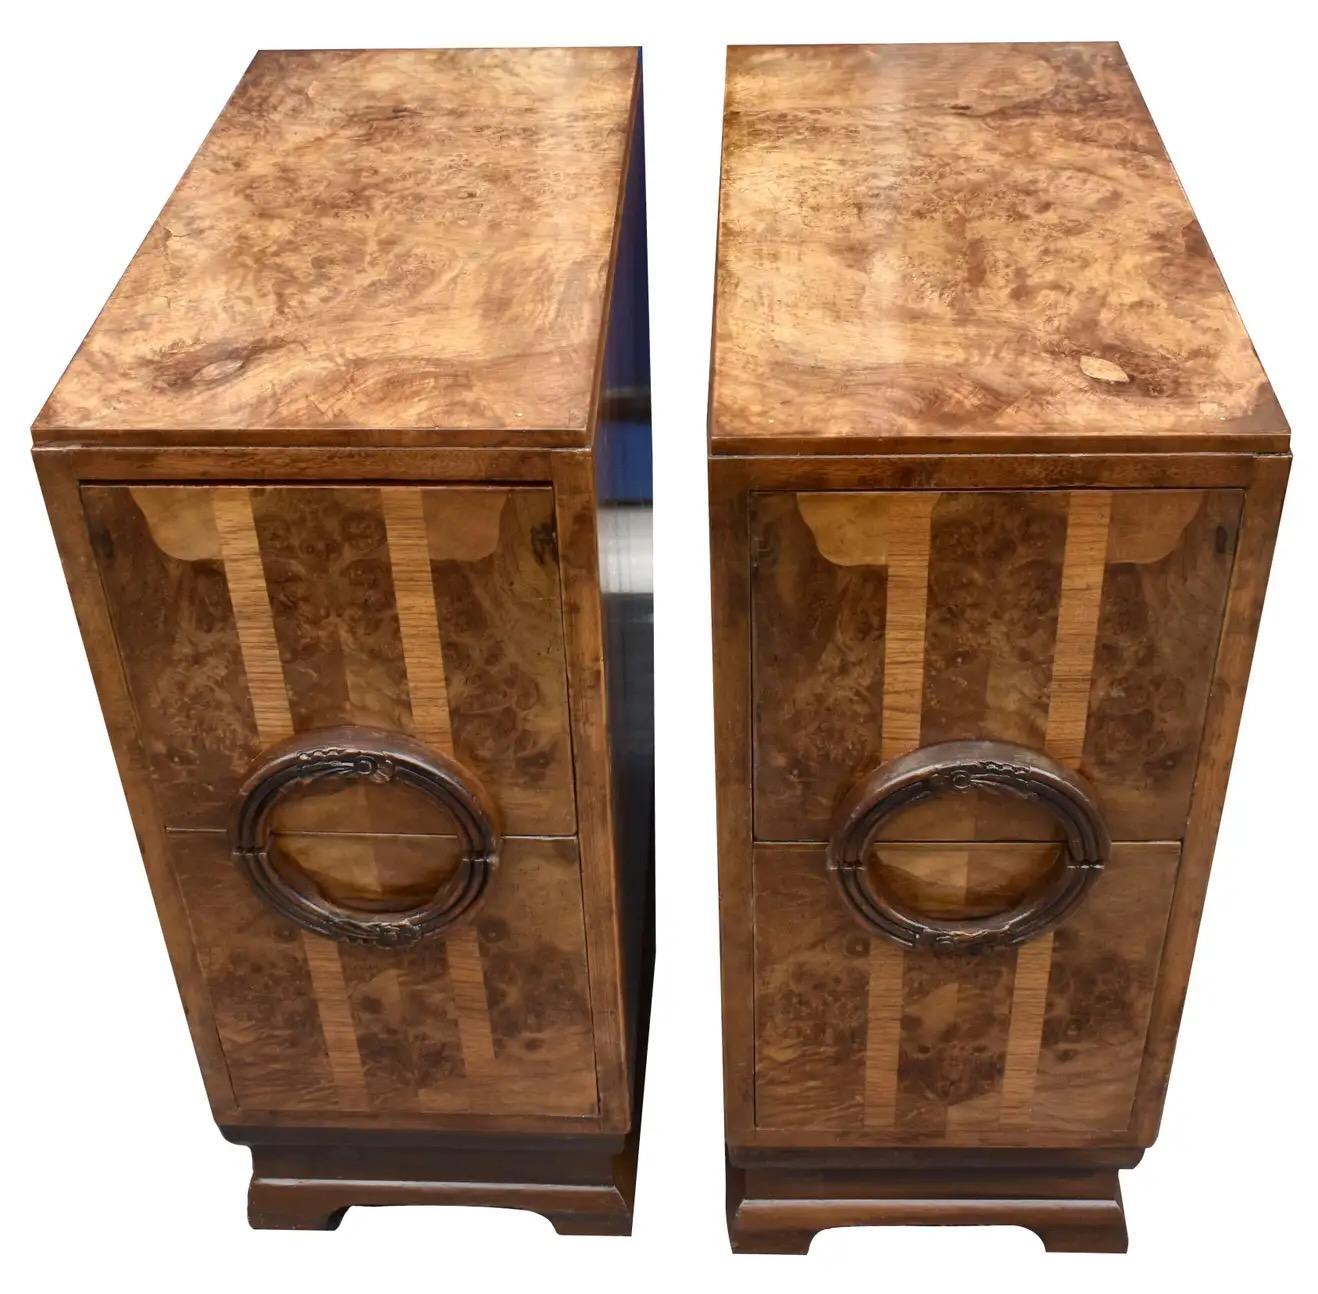 Fabulous pair of matching 1930's English  Art Deco bedside tables/nightstands  in heavily figured walnut veneer with contrasting walnut feather banding to the centre creating a fabulous geometric effect. Two generously sized drawers to each cabinet